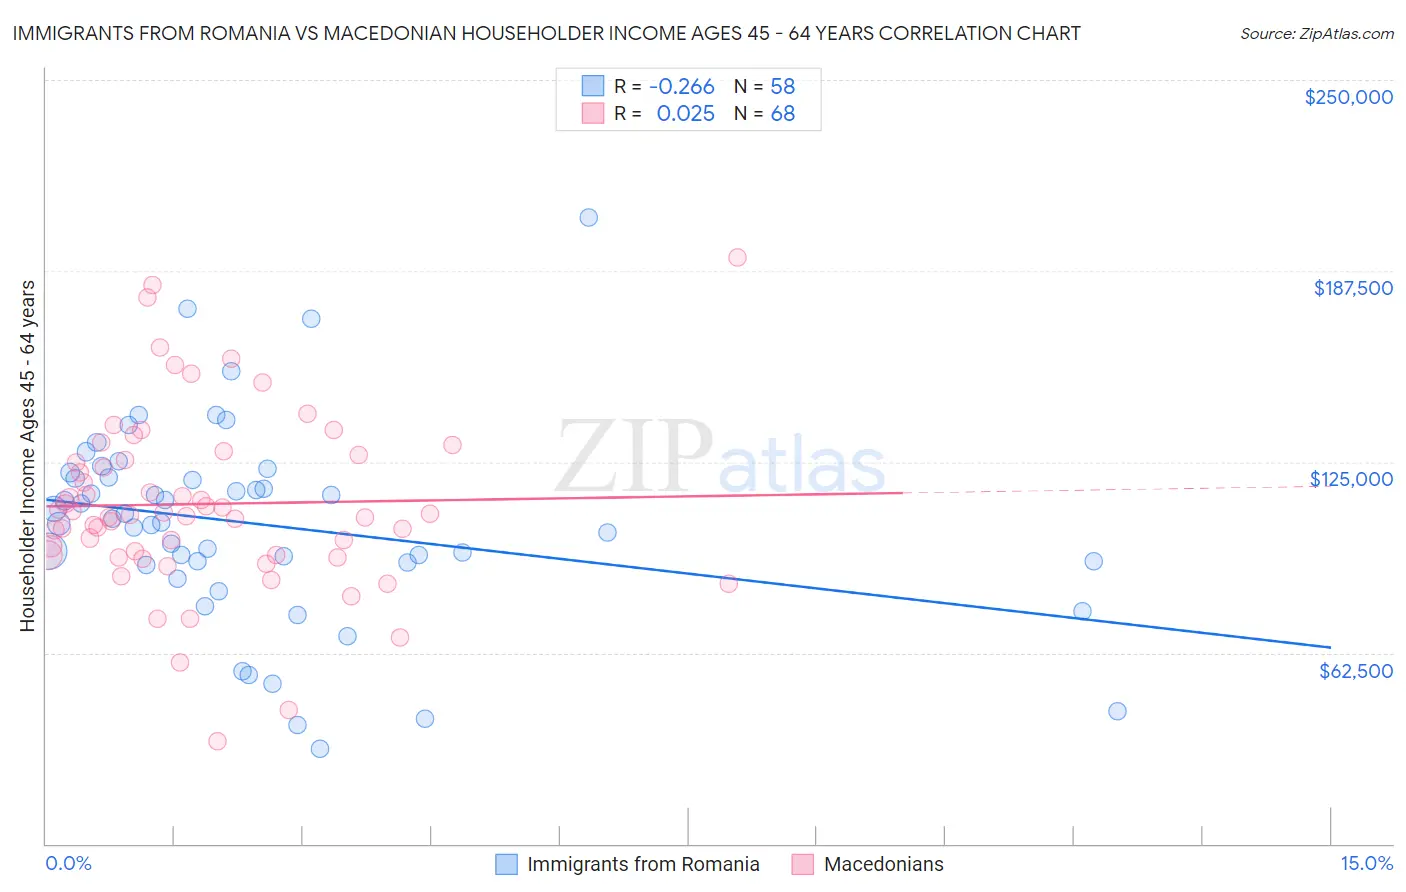 Immigrants from Romania vs Macedonian Householder Income Ages 45 - 64 years